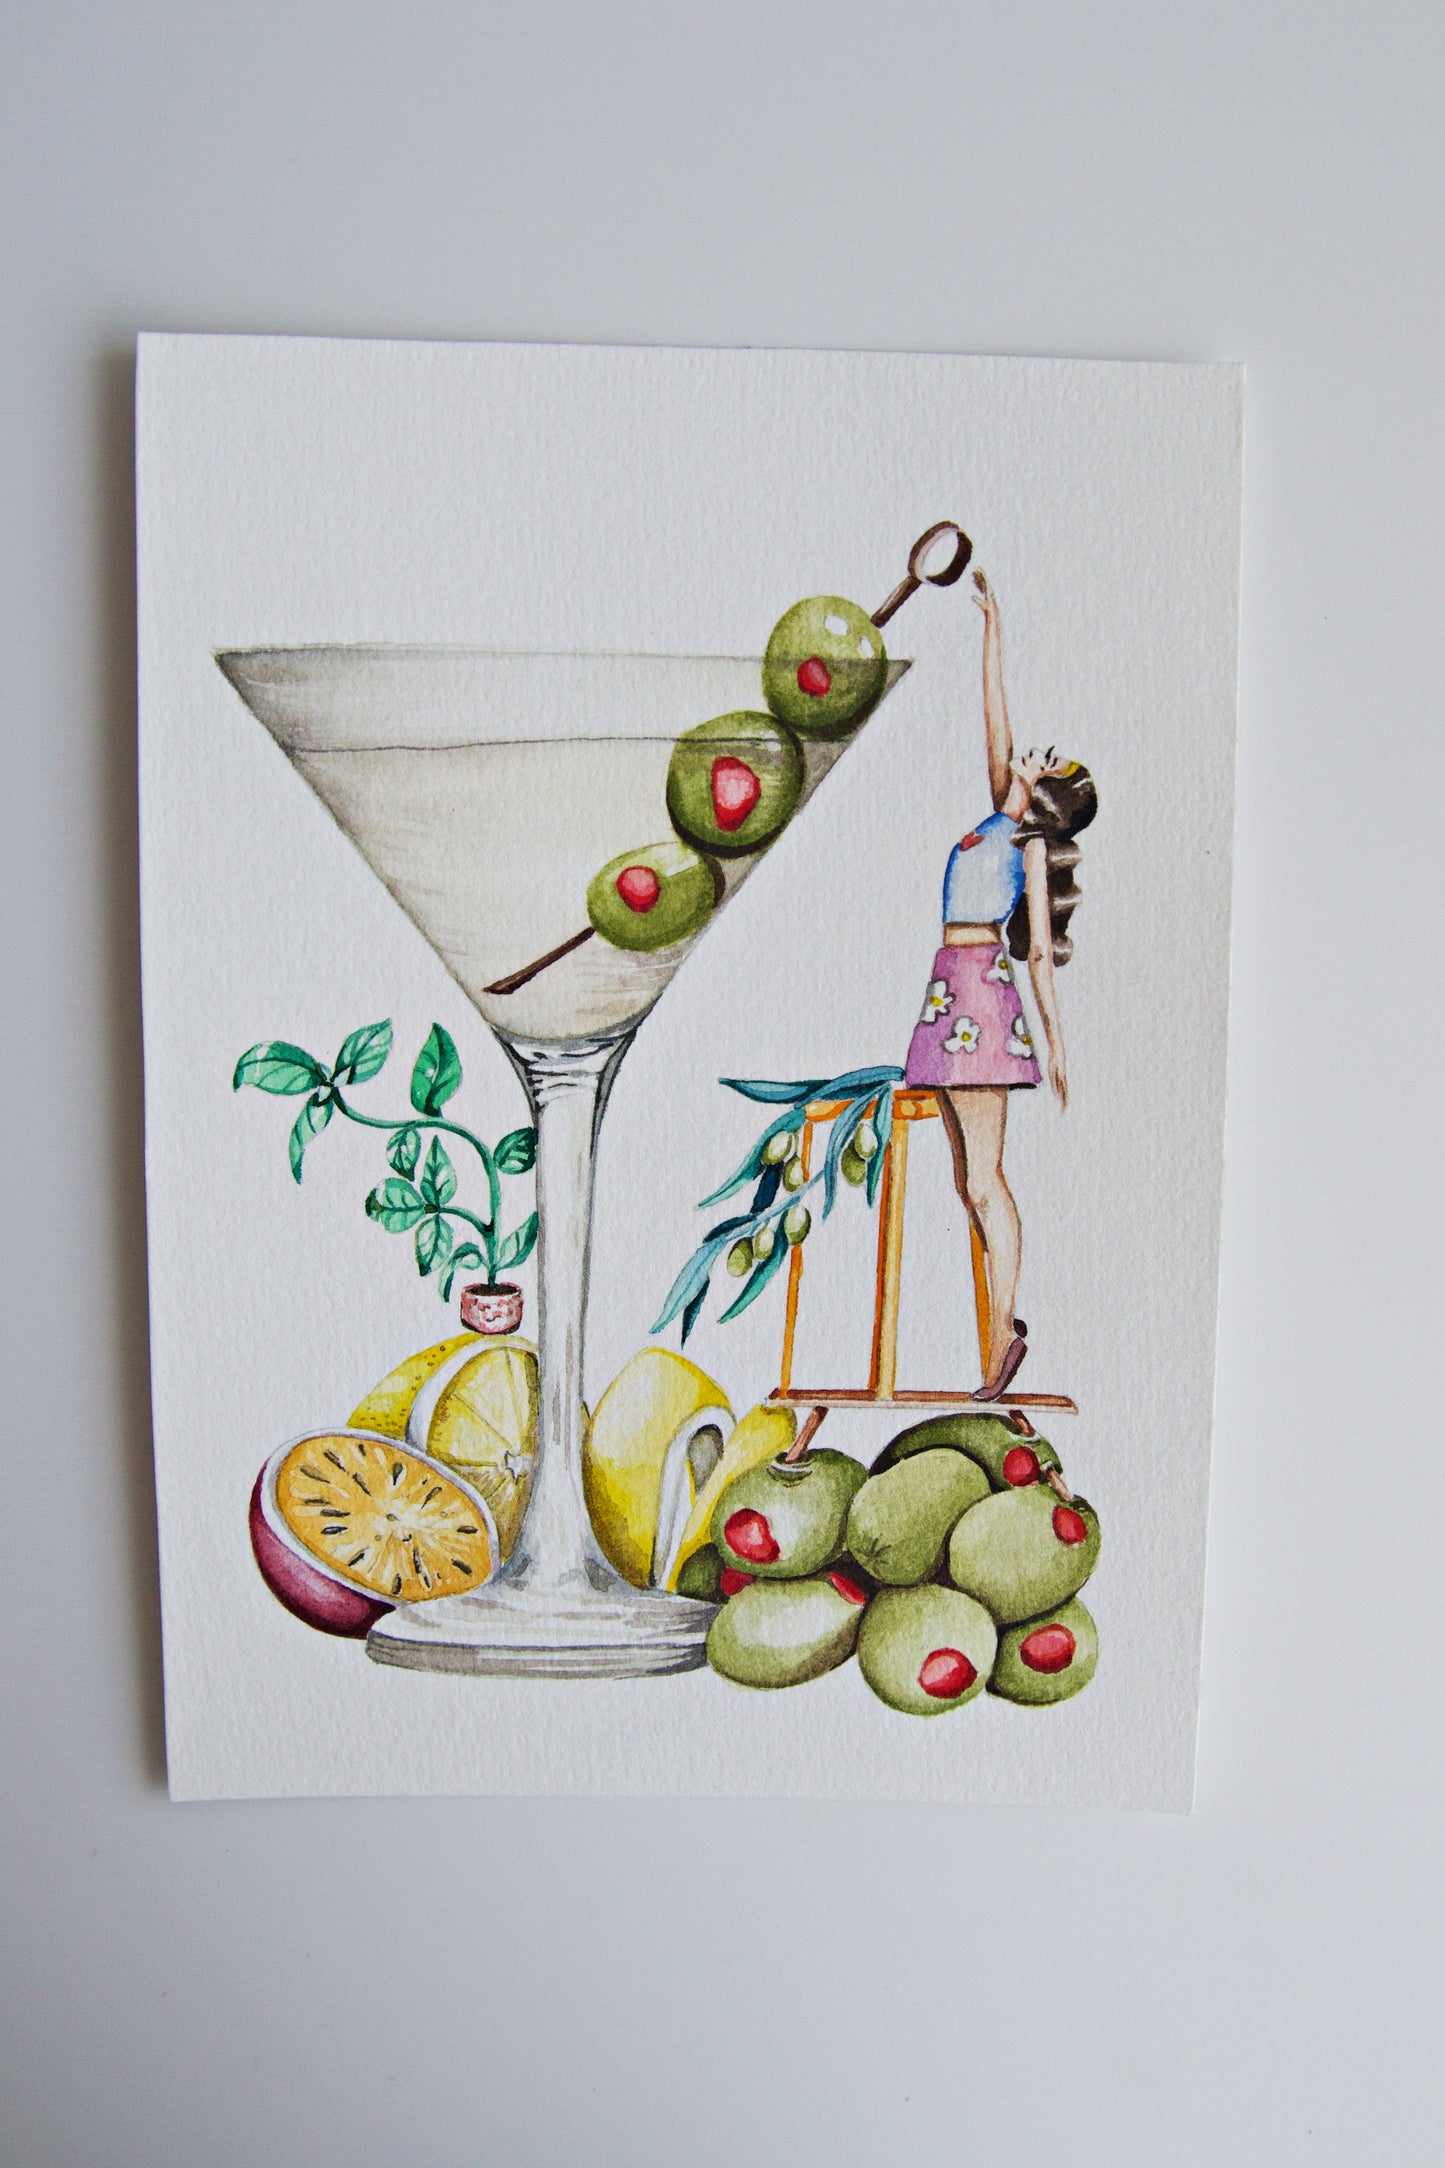 The Olives Keeper (Martini)